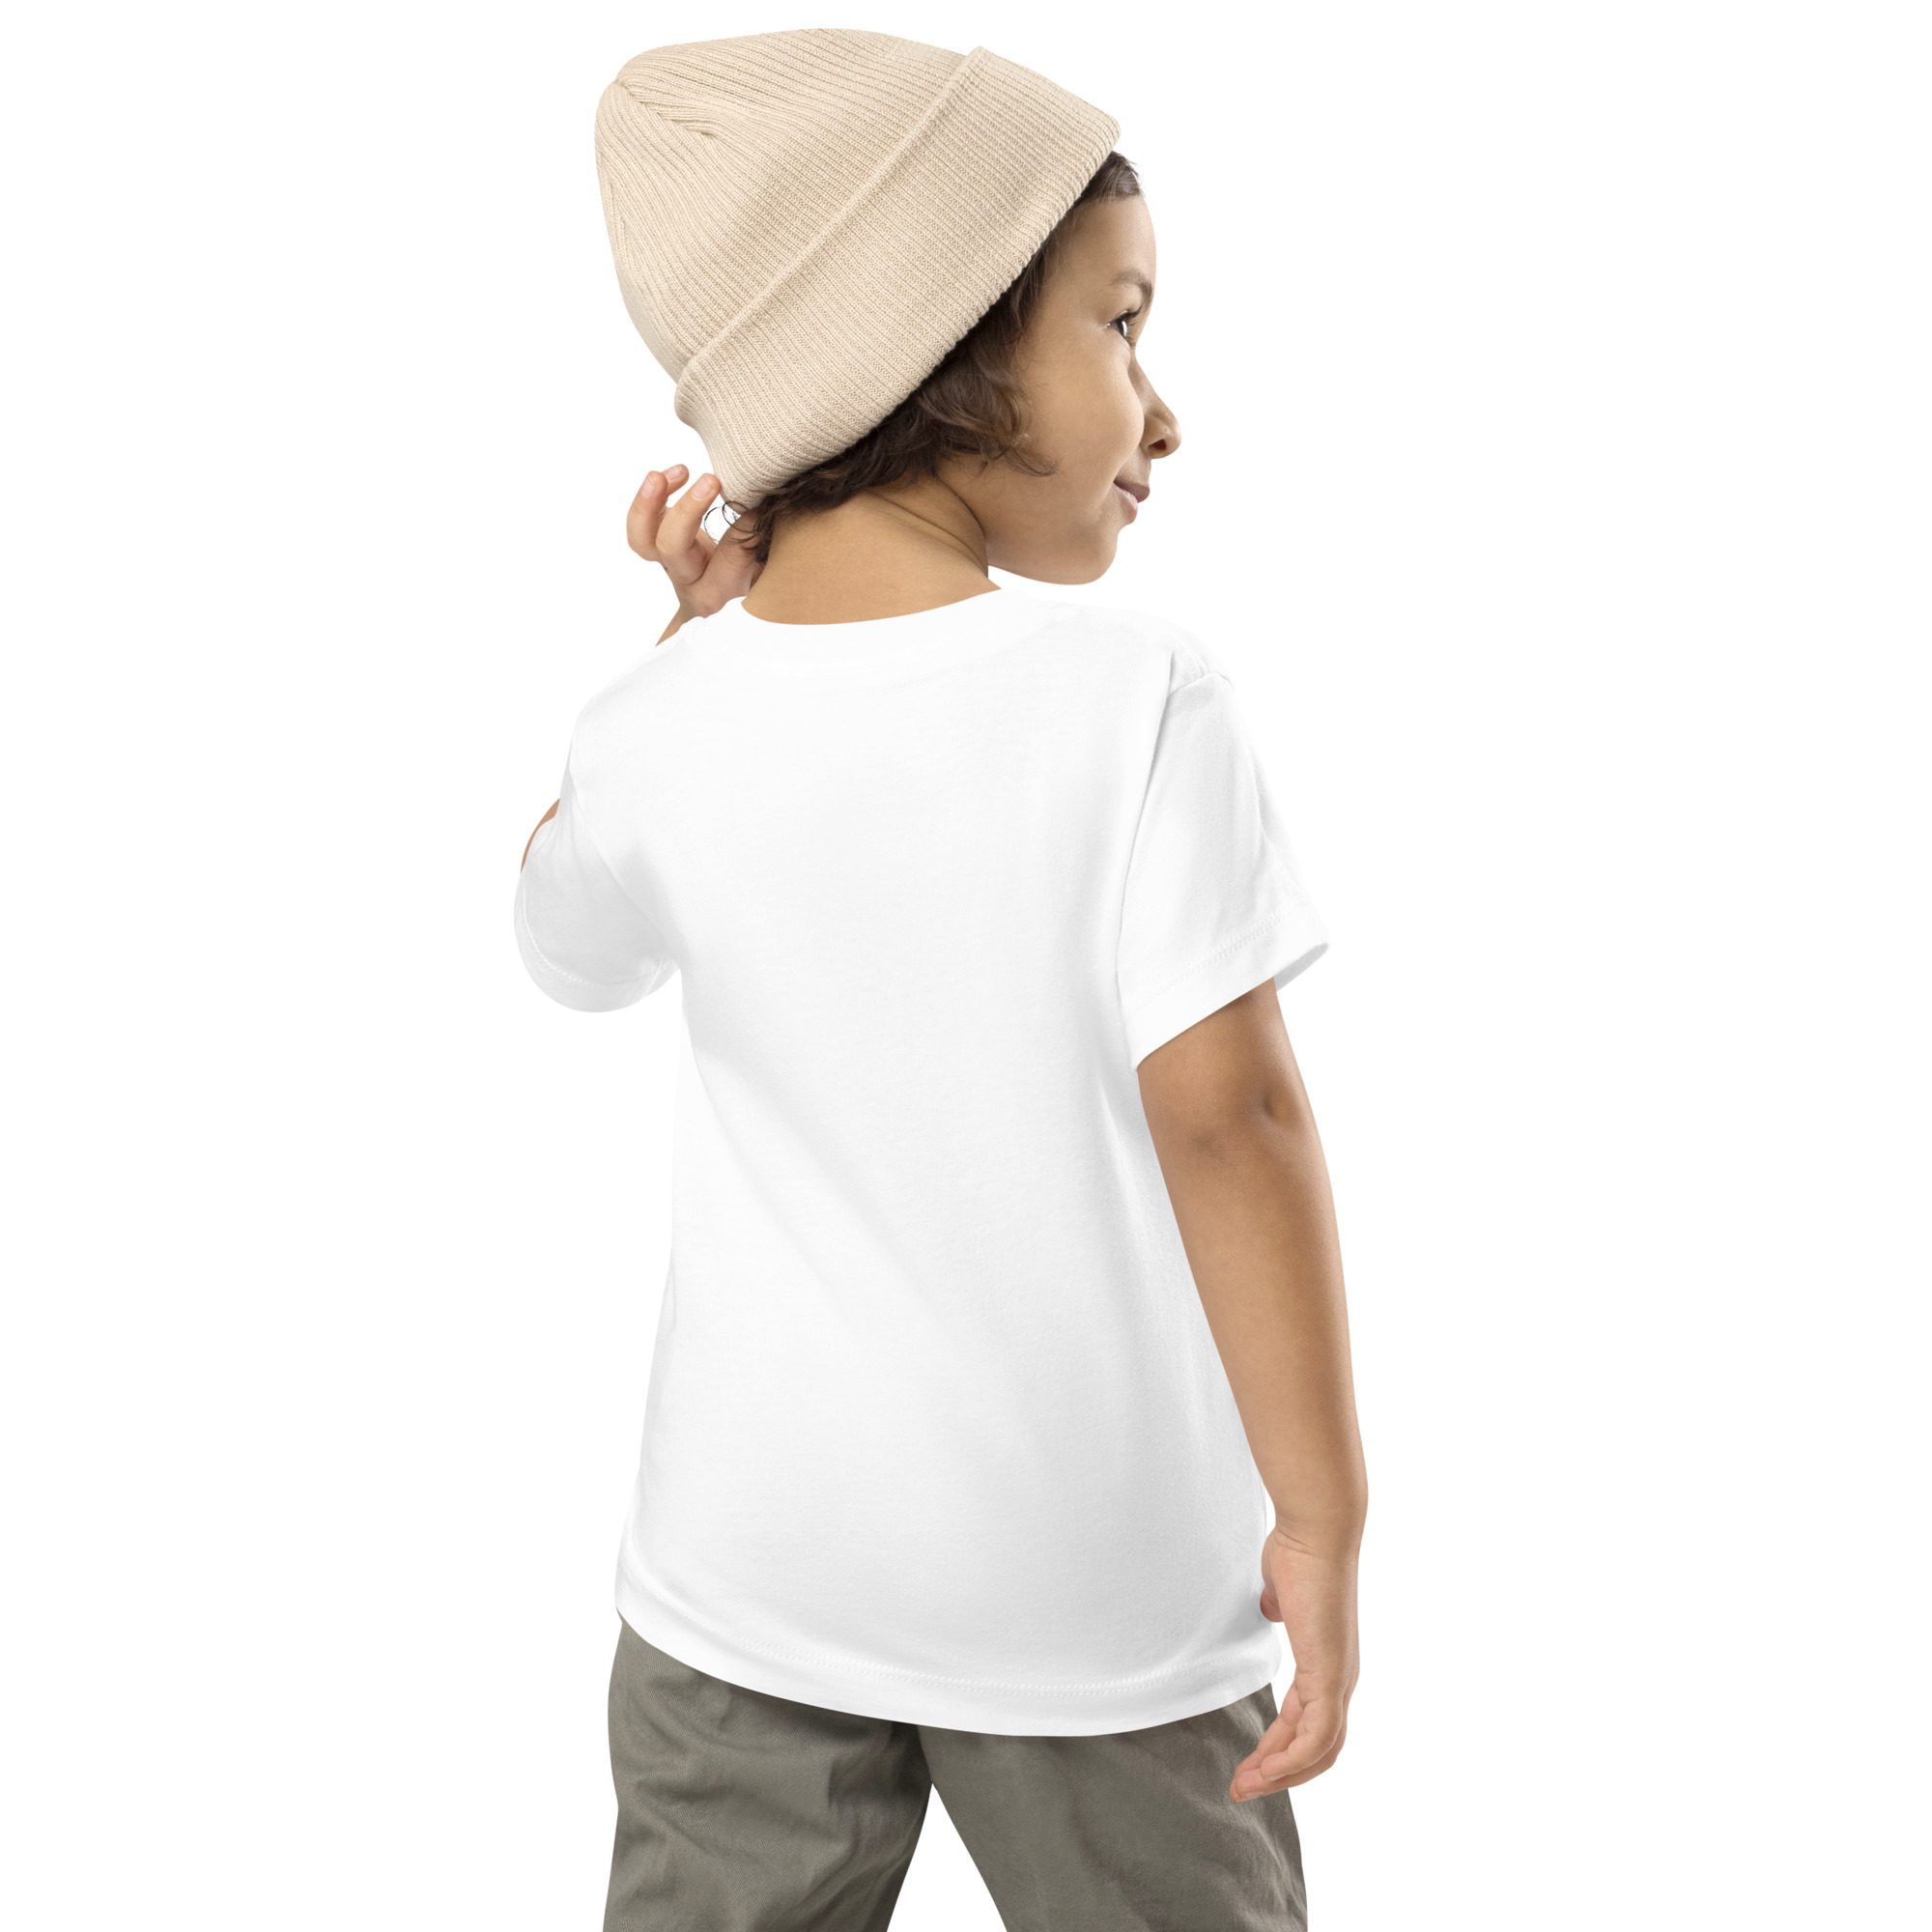 Handle With Care – FRAGILE Toddler T-shirt